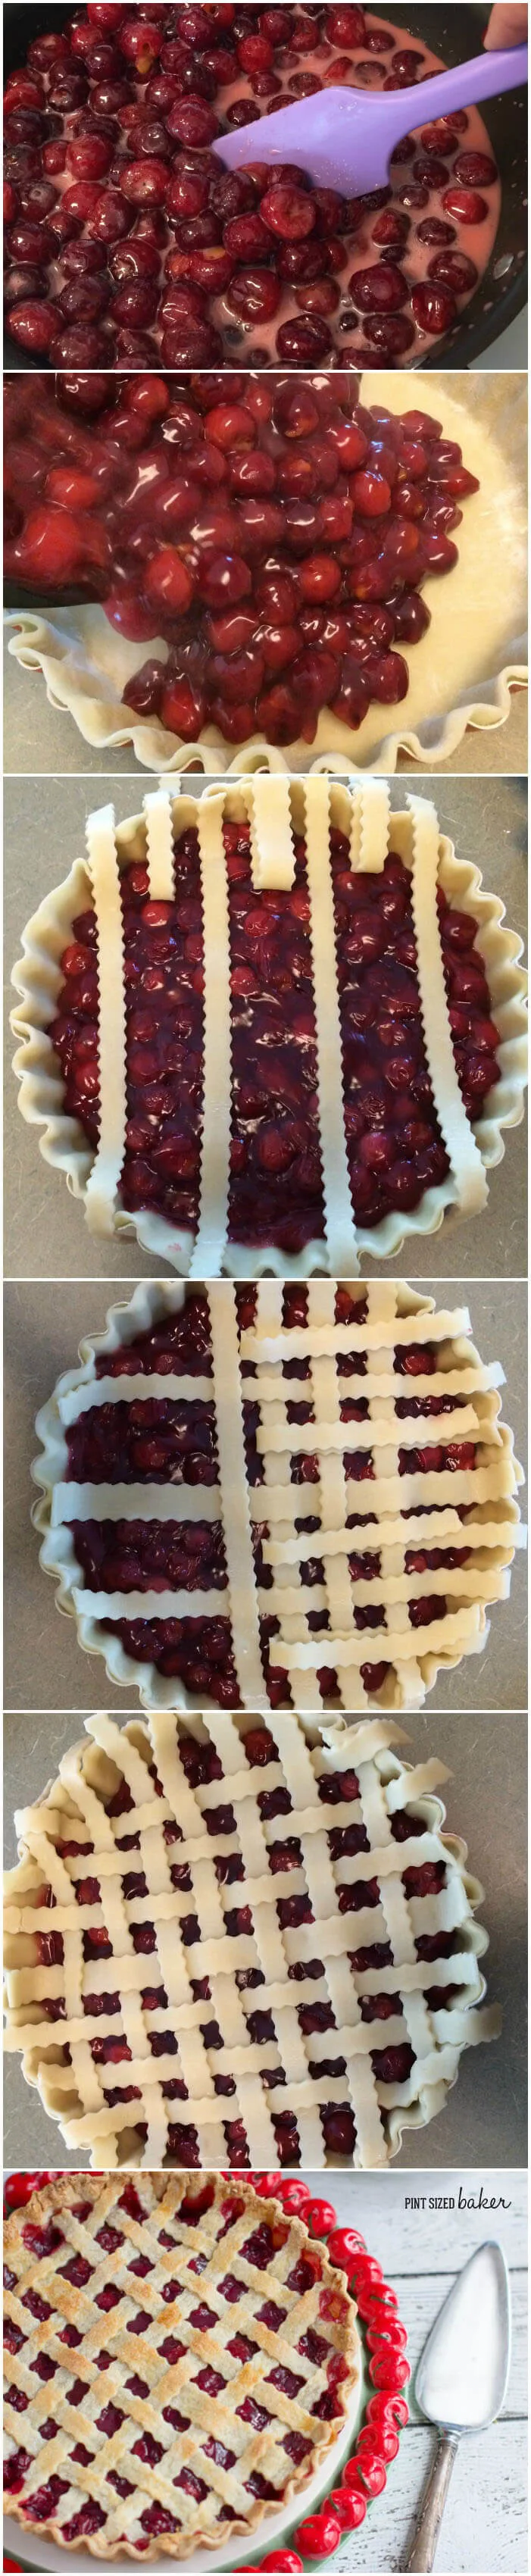 Baking a Deep Dish Cherry Pie is a piece of cake - I mean pie! Making the lattice top just makes this pie look amazing.